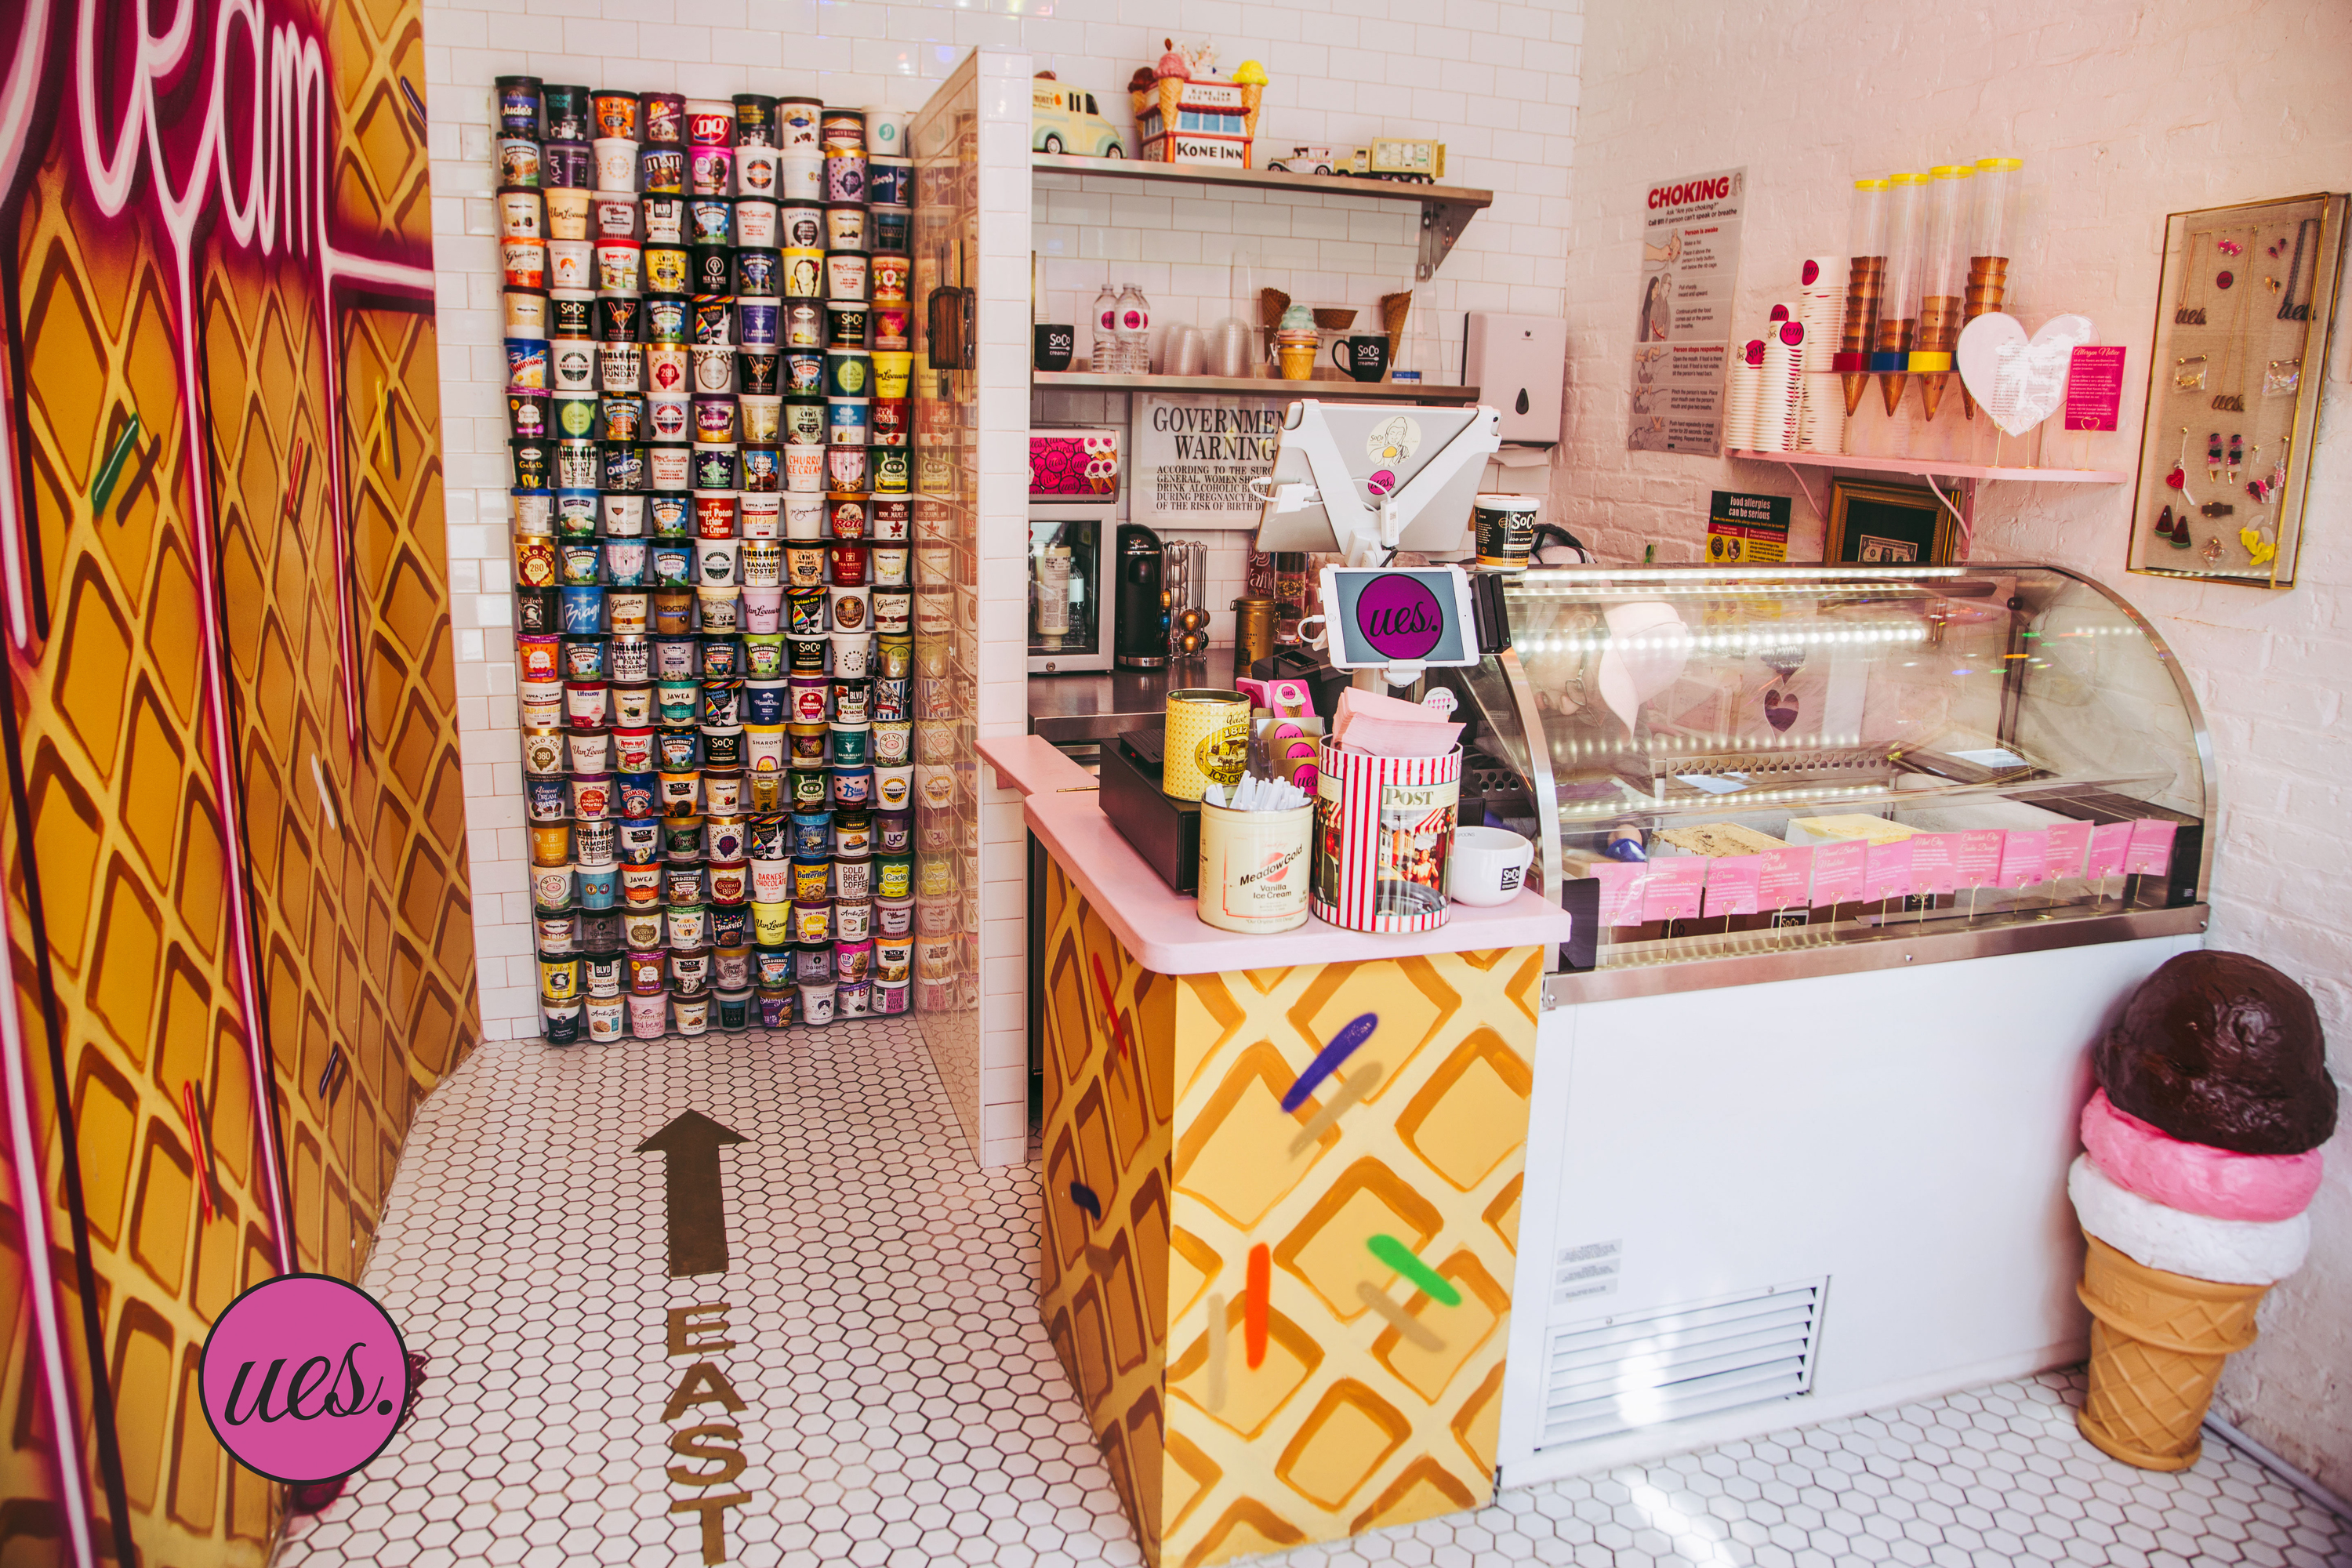 This UES Shoppe Has Turned Into An Adorable Outdoor Ice Cream Parlor • The  UES - Secret NYC